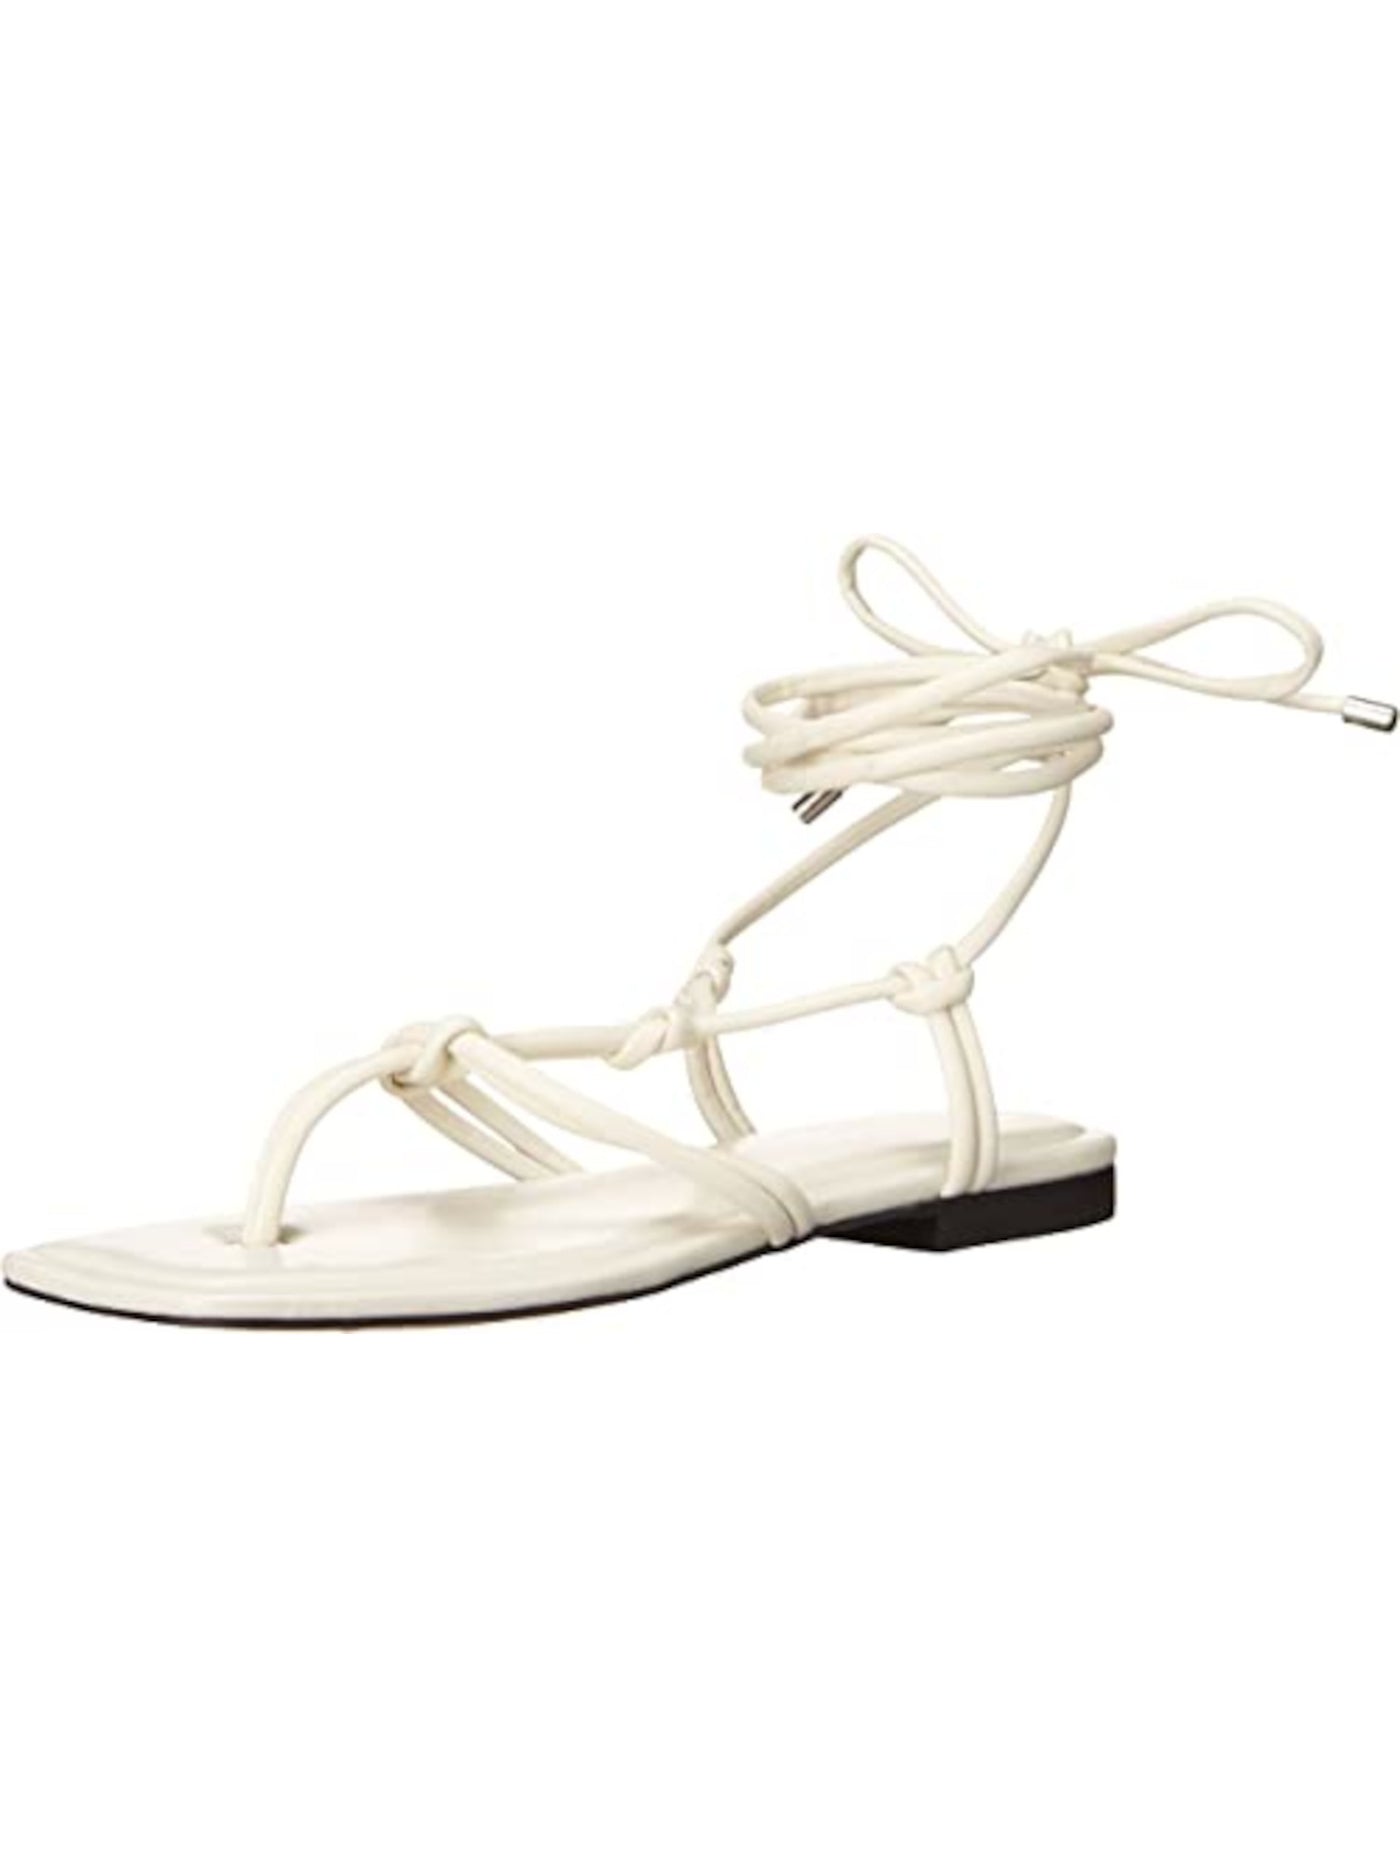 MARC FISHER Womens Ivory Strappy Padded Falina Square Toe Lace-Up Thong Sandals Shoes 5.5 M